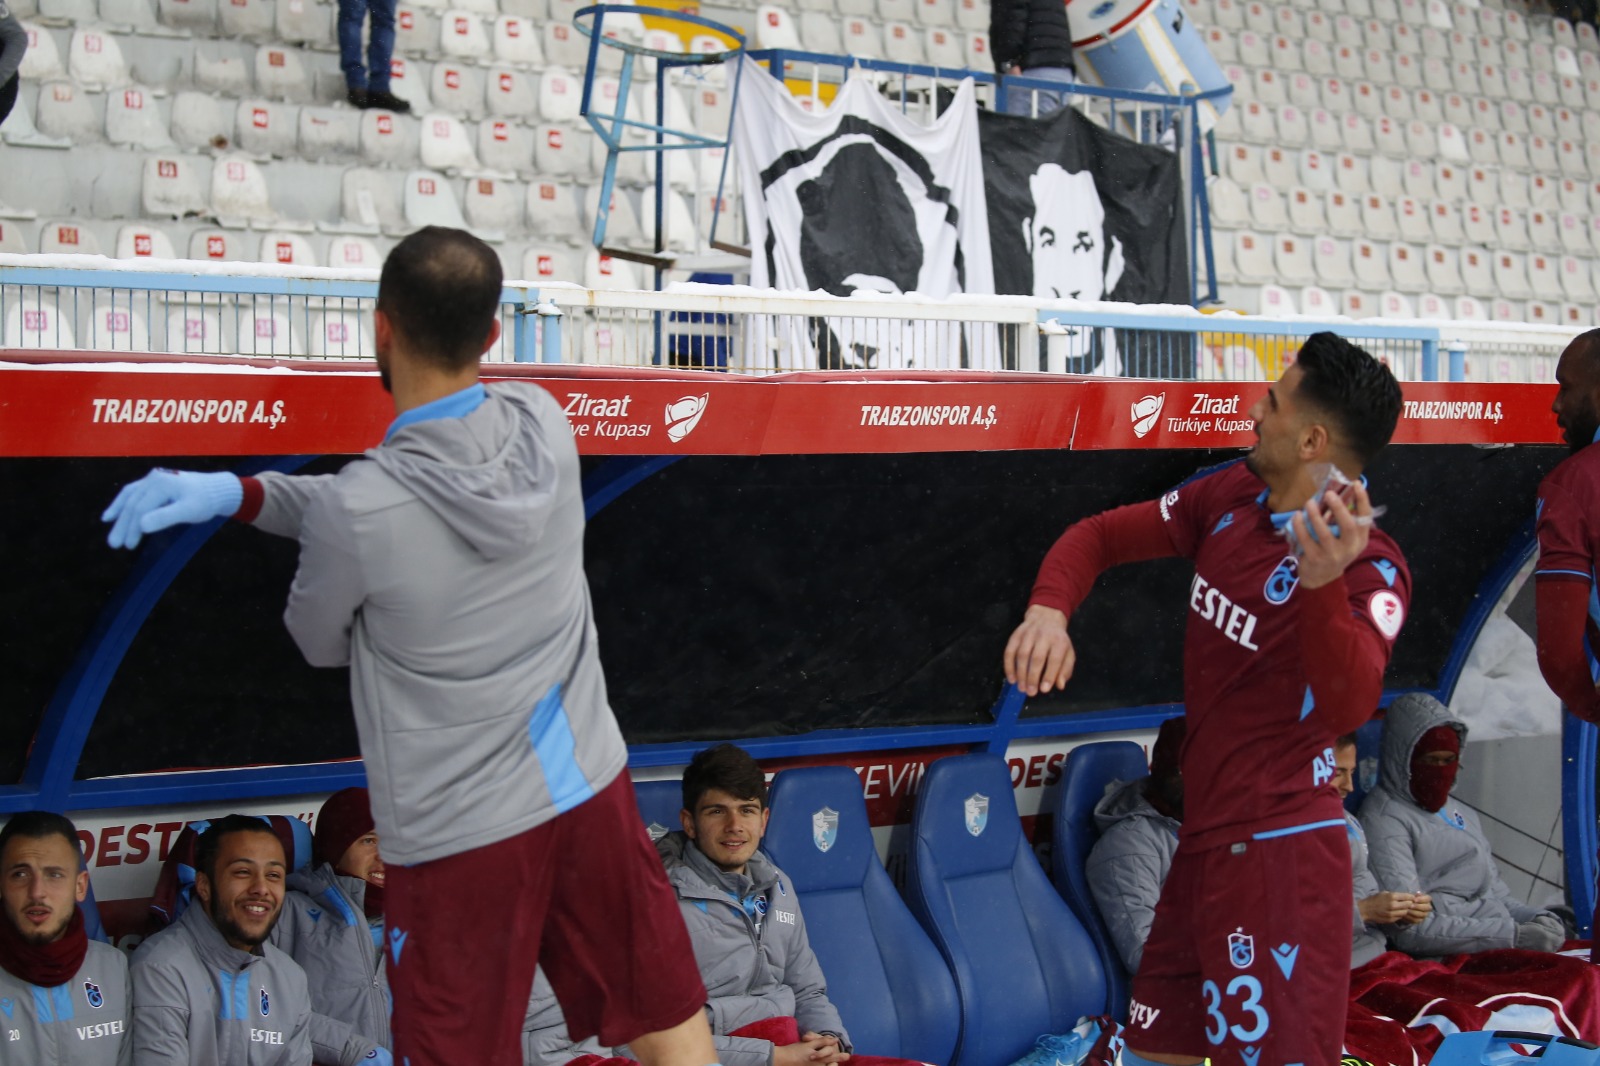 Hazelnut from the Footballers of Trabzonspor to the Spectators 